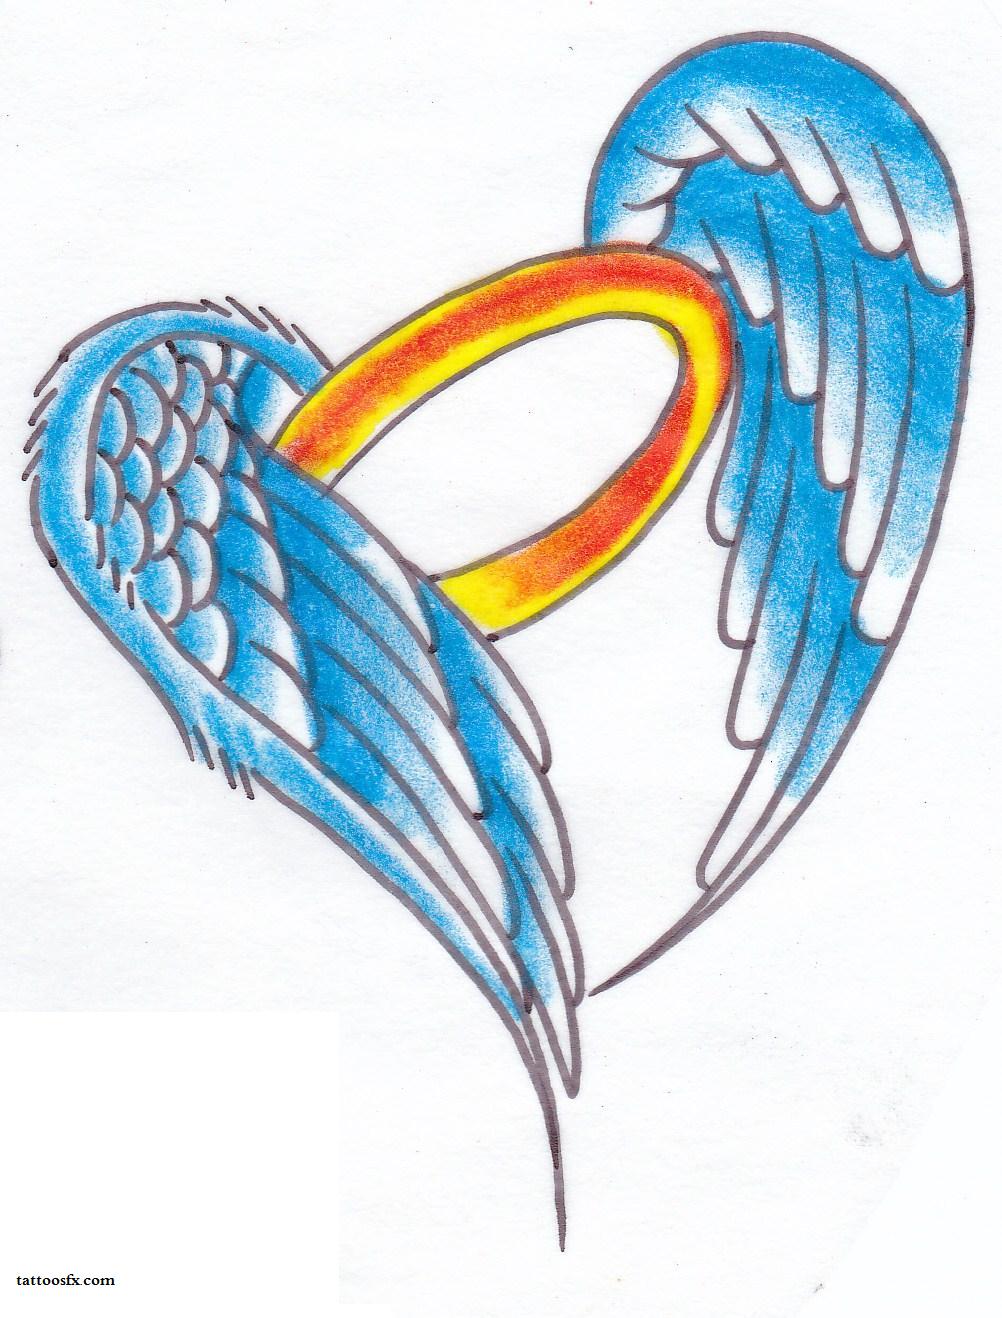 Free Angel Halo Drawings, Download Free Angel Halo Drawings png images ...